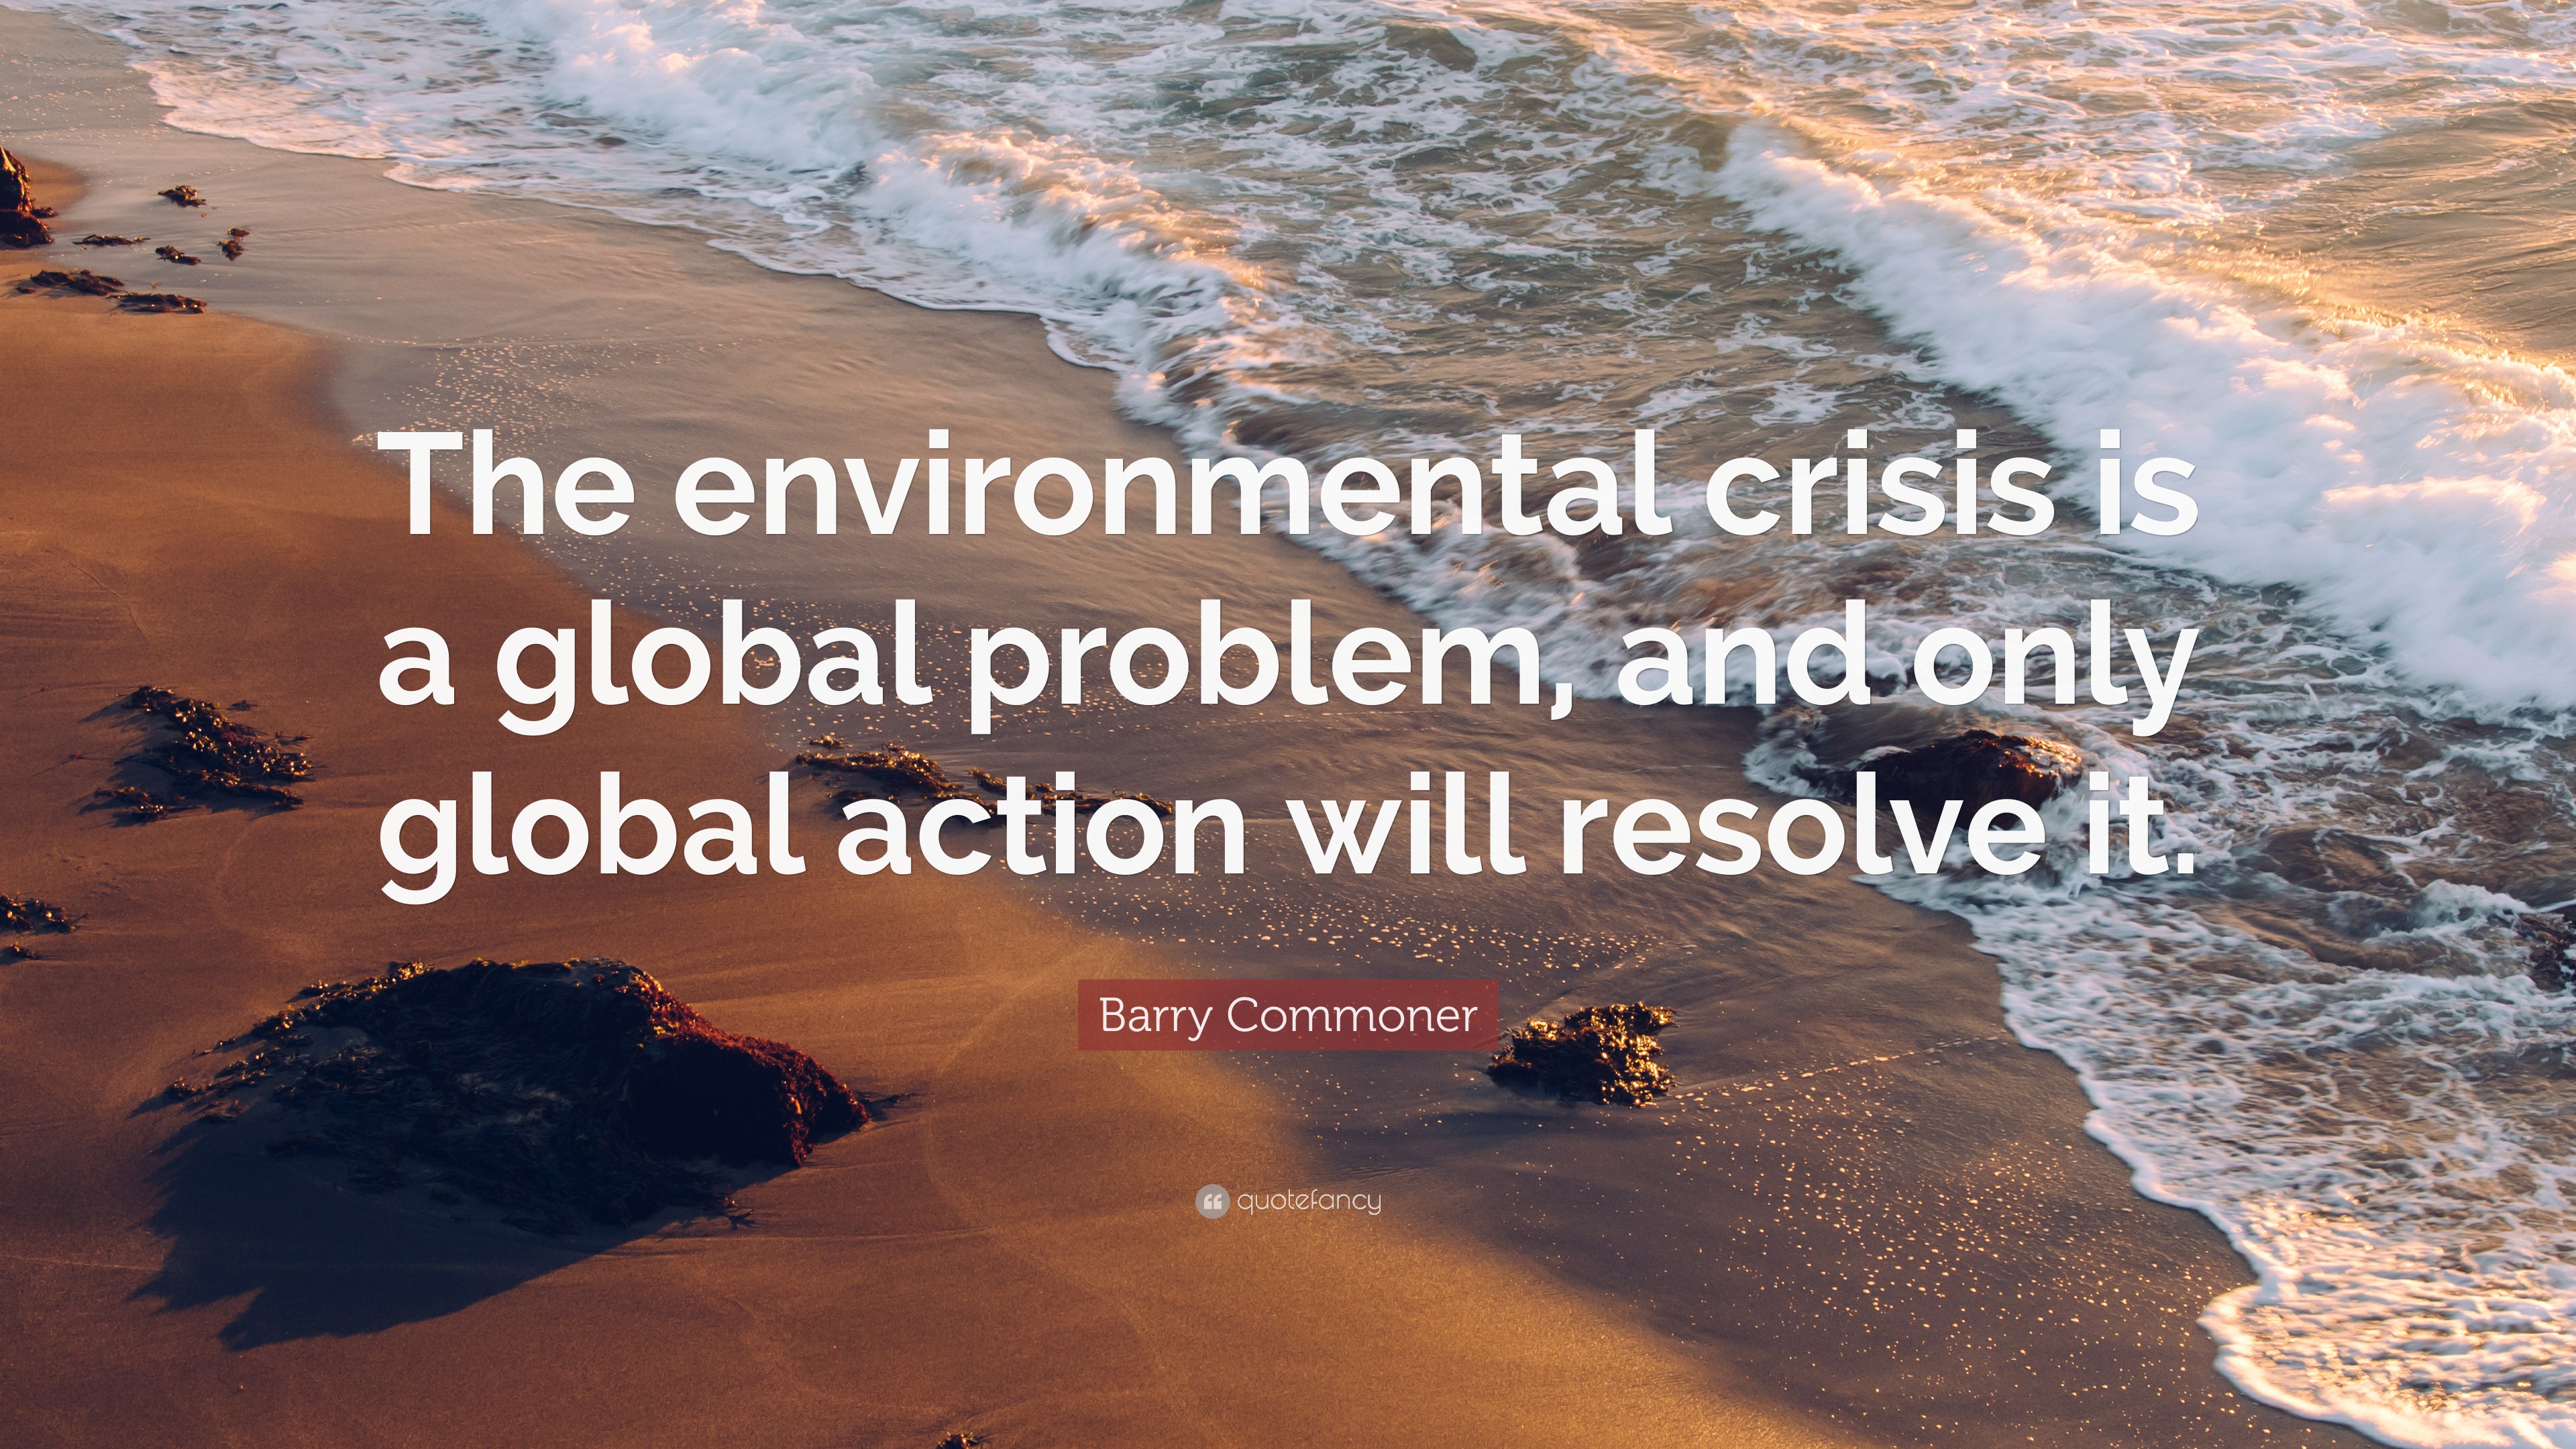 Barry Commoner Quote: “The environmental crisis is a global problem